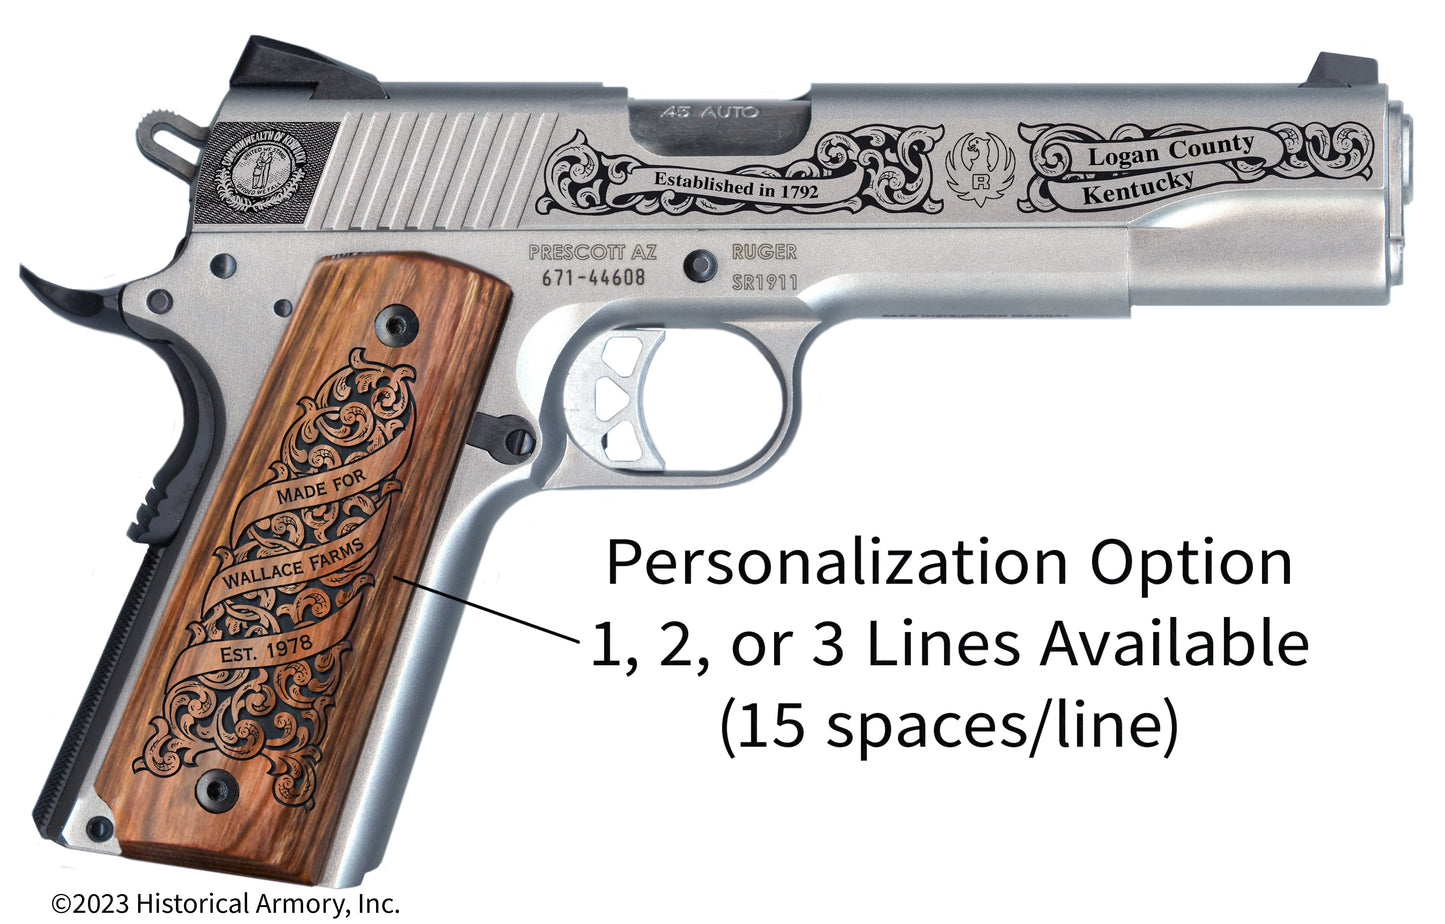 Logan County Kentucky Personalized Engraved .45 Auto Ruger 1911